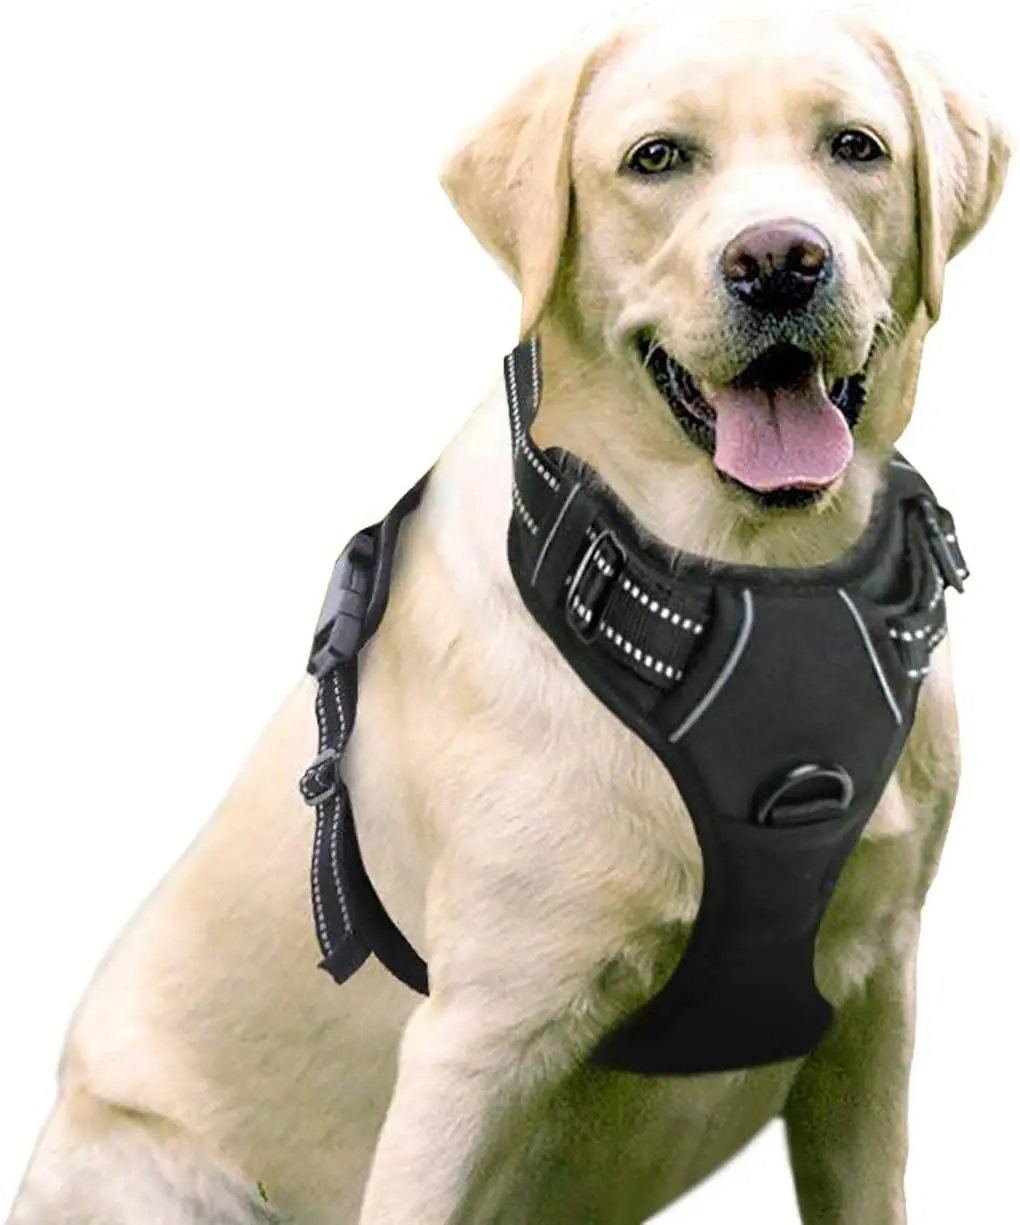 

Amazon Hot Selling Adjustable No Pull Breathable Oxford Outdoor Pet Vest 3M Reflective Dog Harness, Black or custom